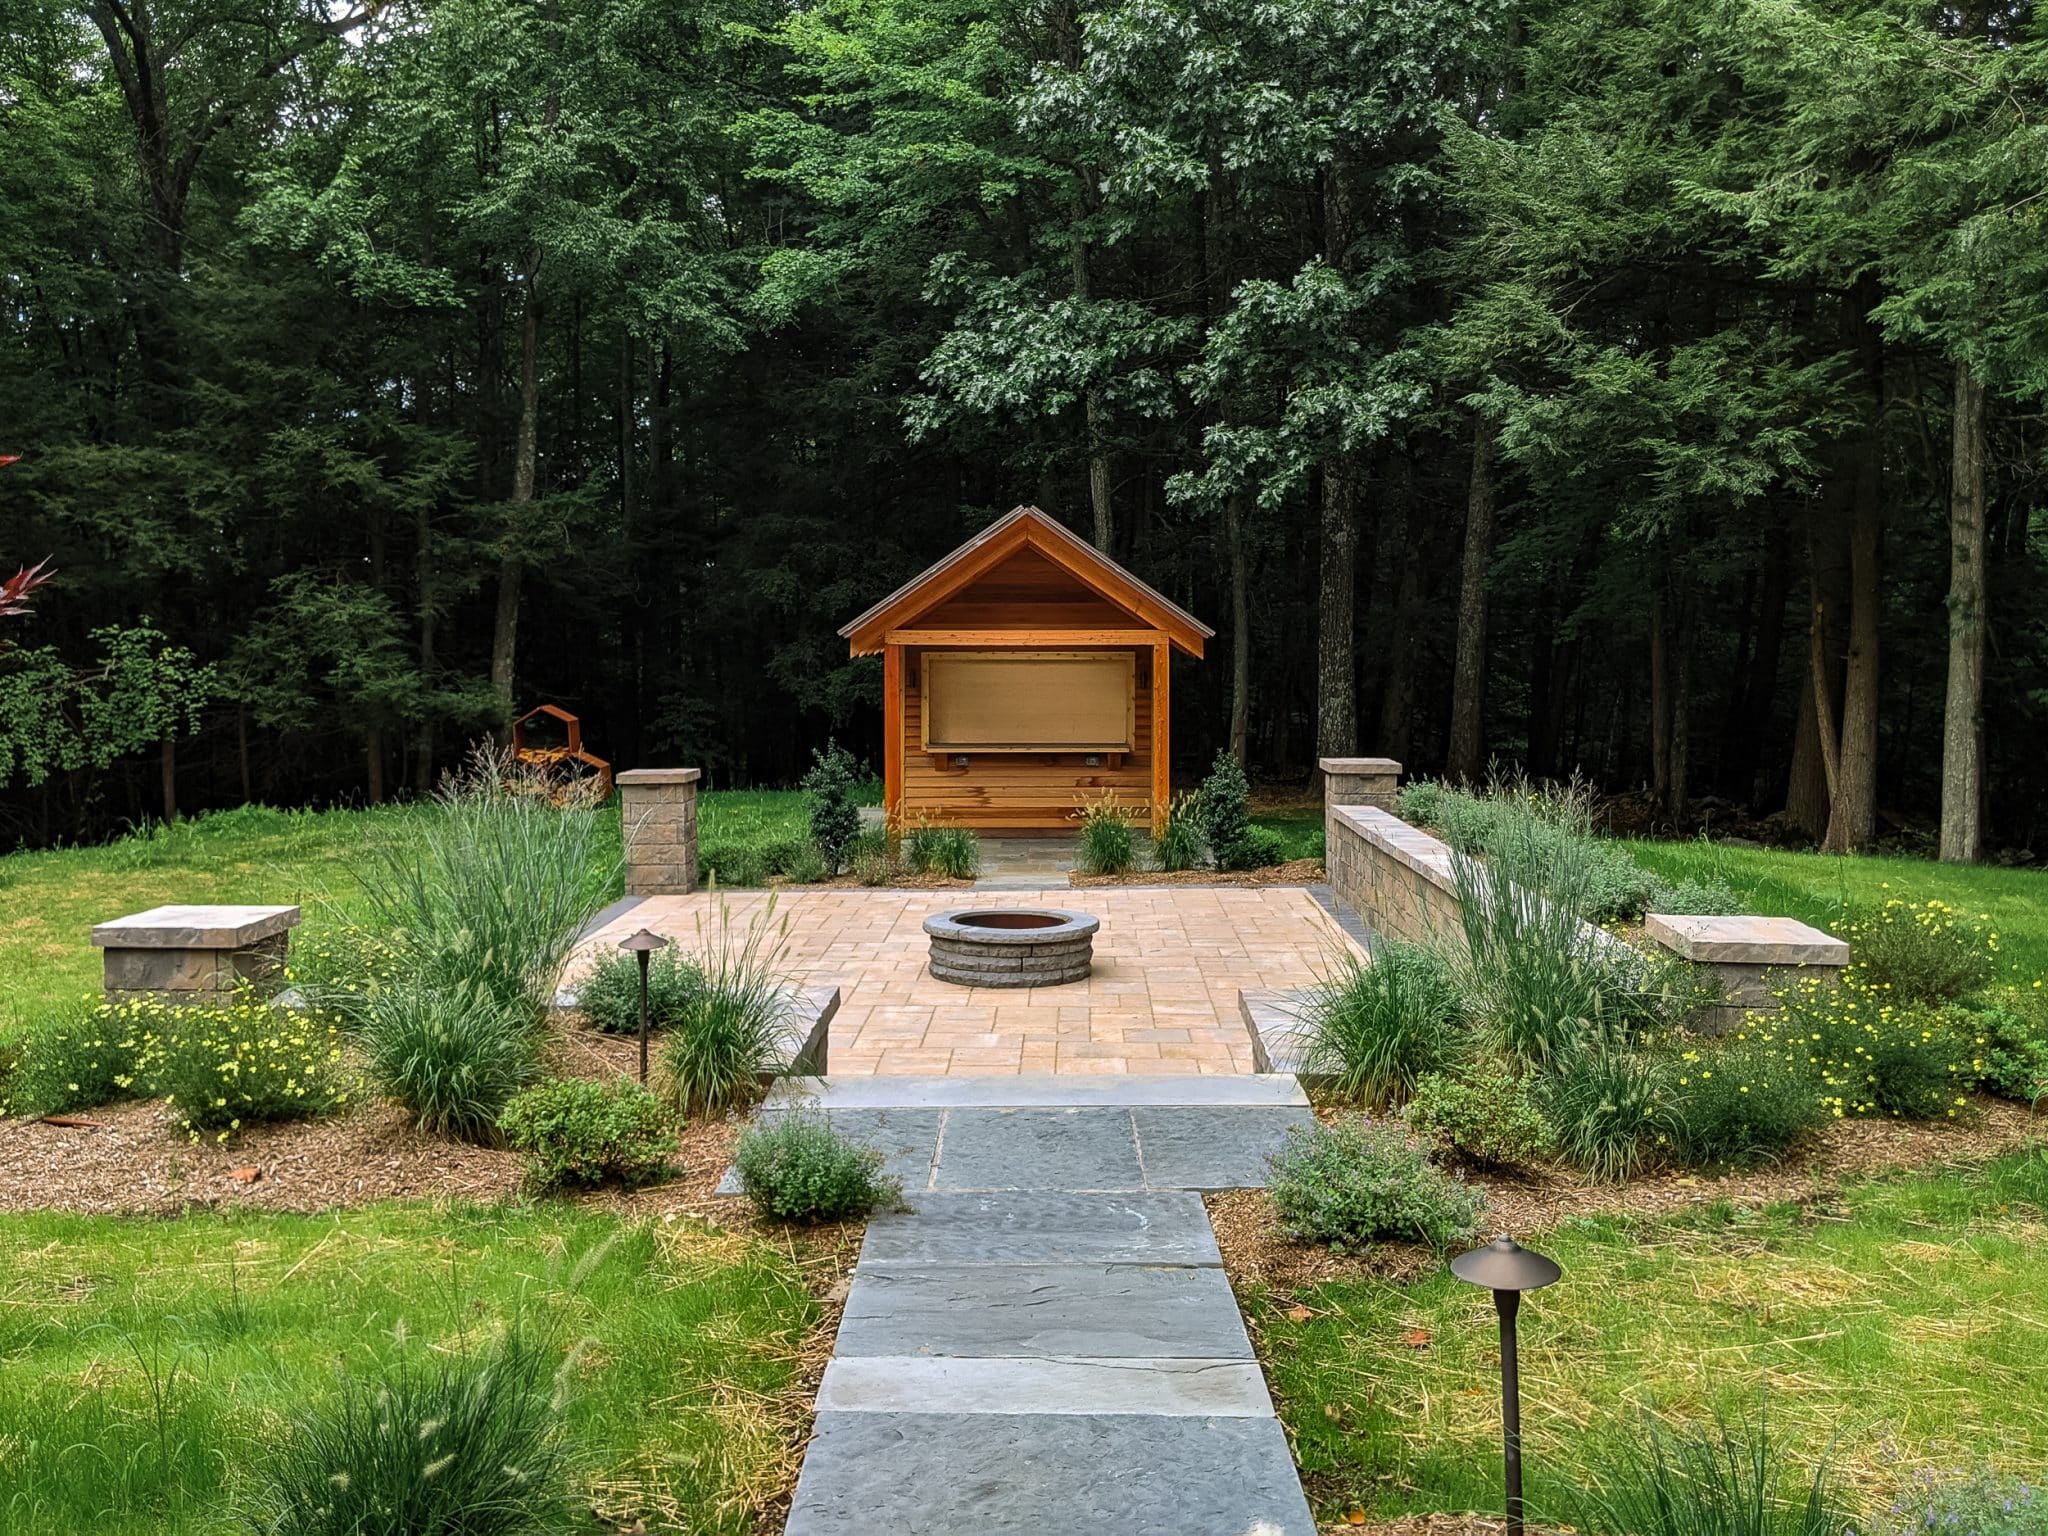 A wooden bar shed with an overhang behind a tan precast concrete Belgard paver patio with a round fire pit. A bluestone walkway, native plantings, and outdoor lighting fixtures are in the foreground. Designed and installed by Ulster County Landscapers, Masseo Landscape, Inc.